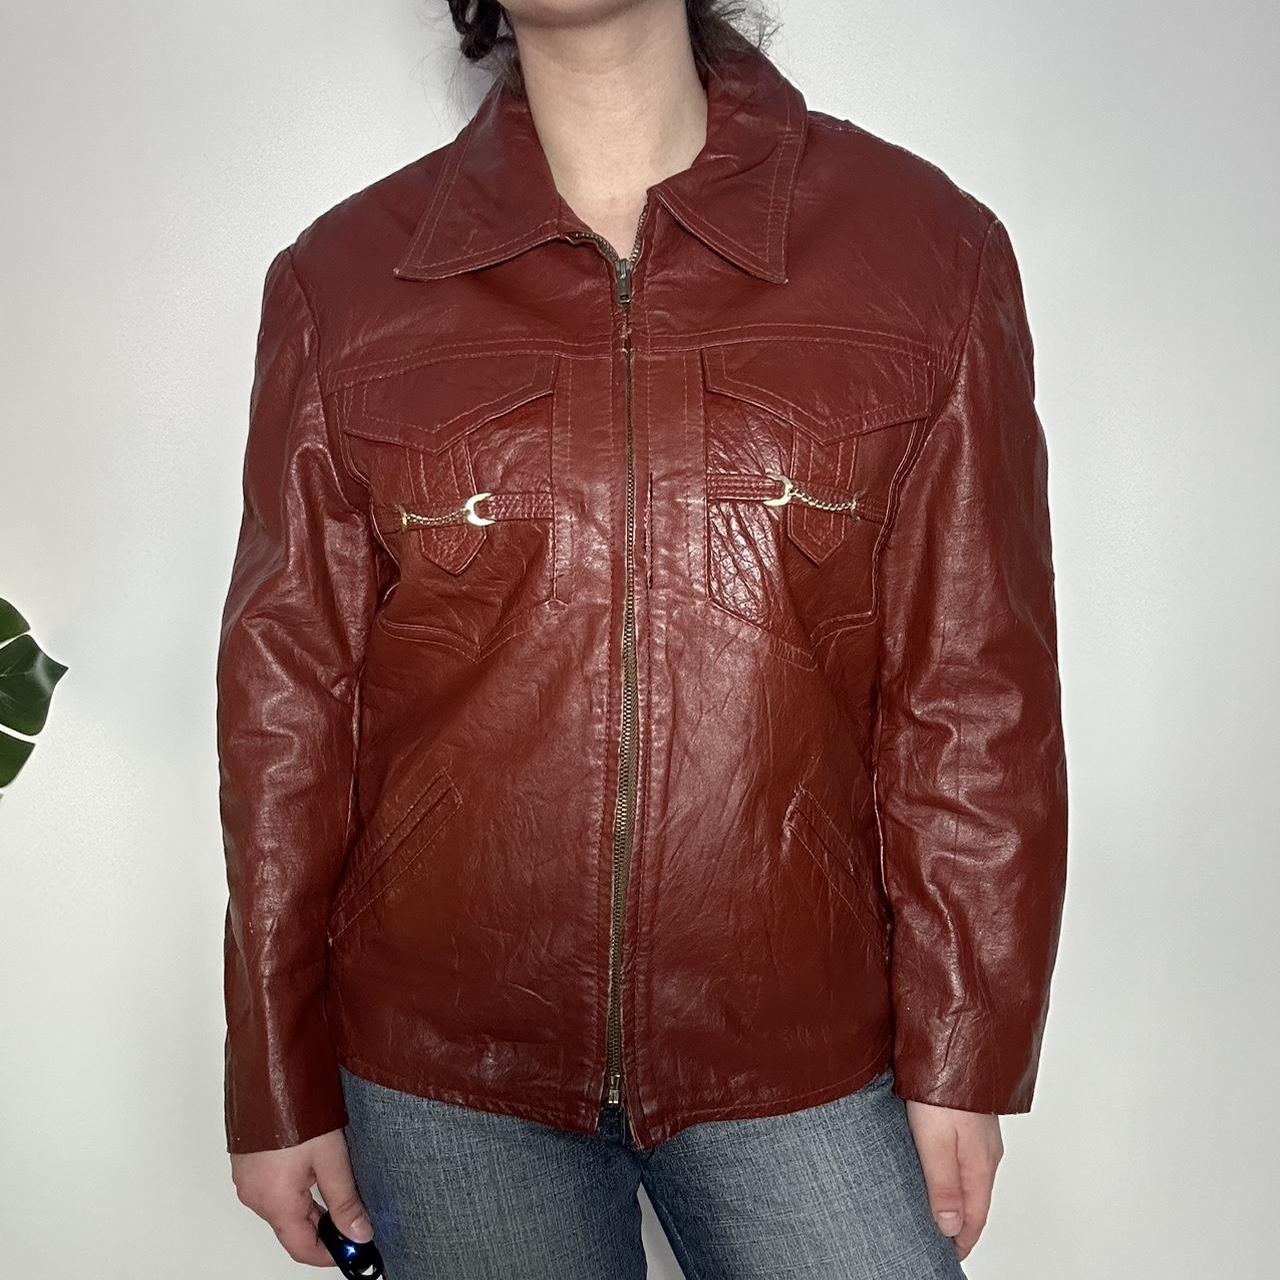 Vintage 70s red real leather jacket